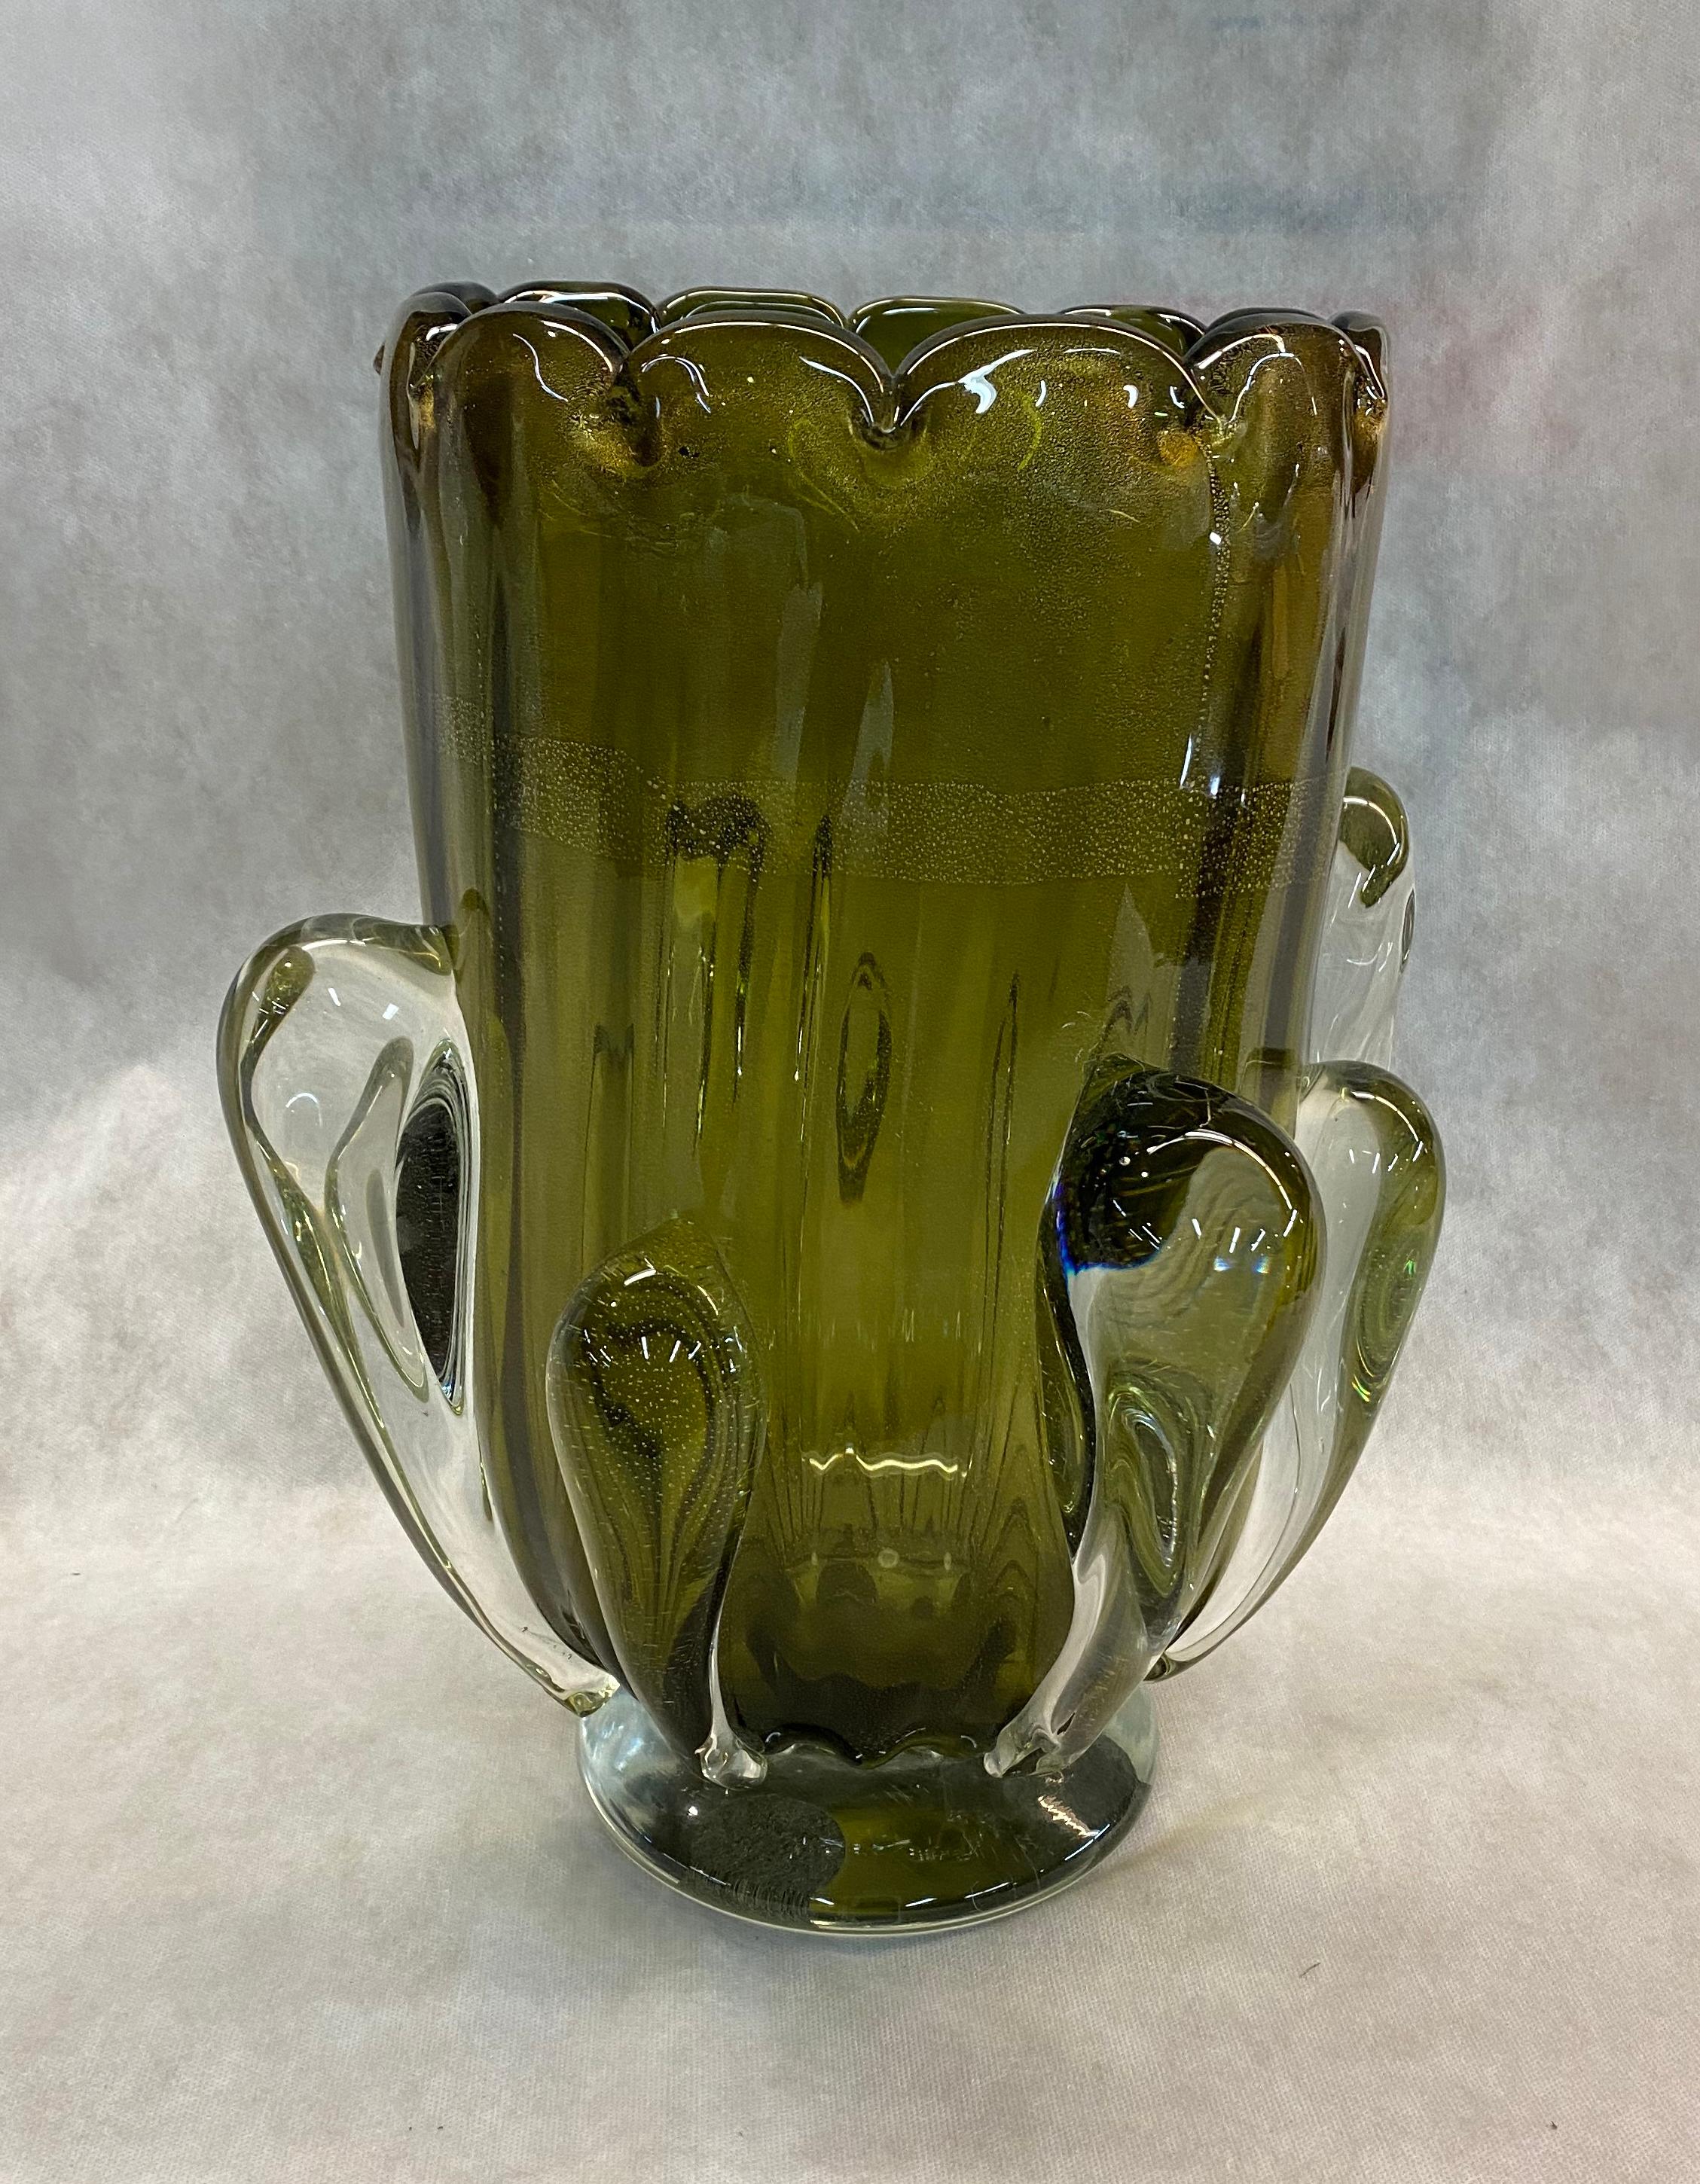 This Italian pair of vases is in translucent olive Murano glass, with gold leaf inclusions decorated with hand applied clear glass drops. Signed in the bottom,

Made in Italy, circa 1970.